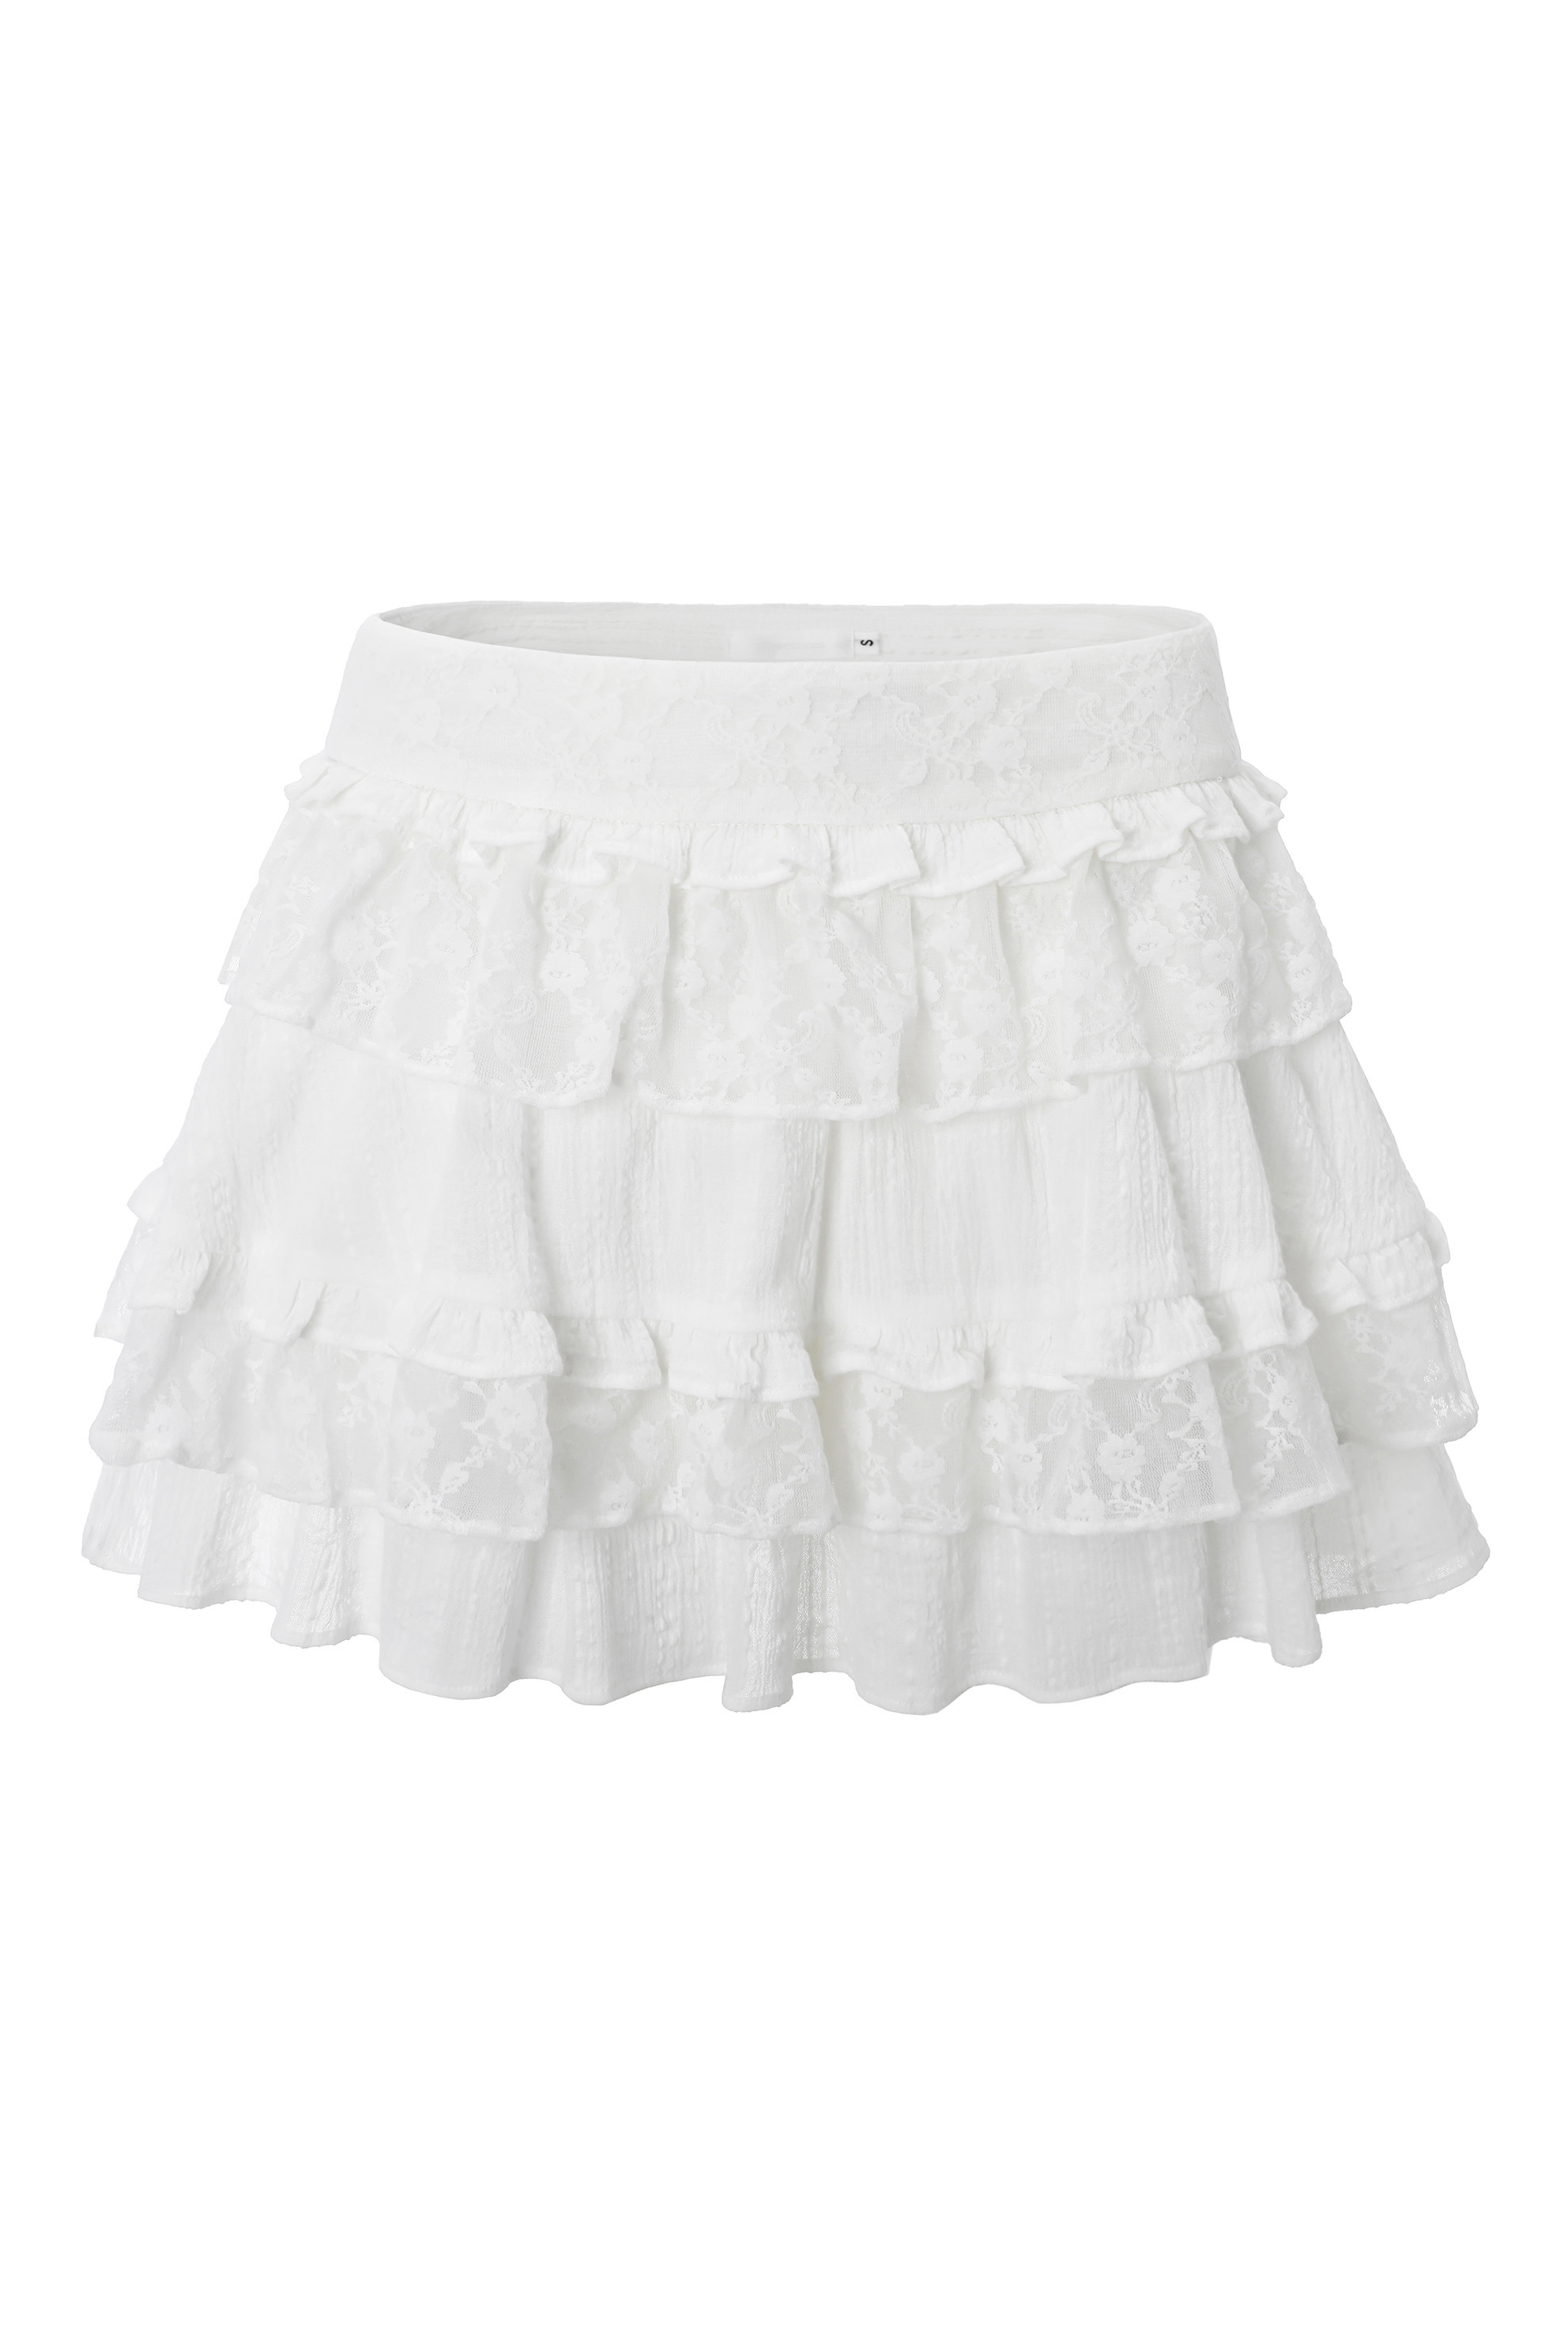 [1st pre-order] Katie lace skirt